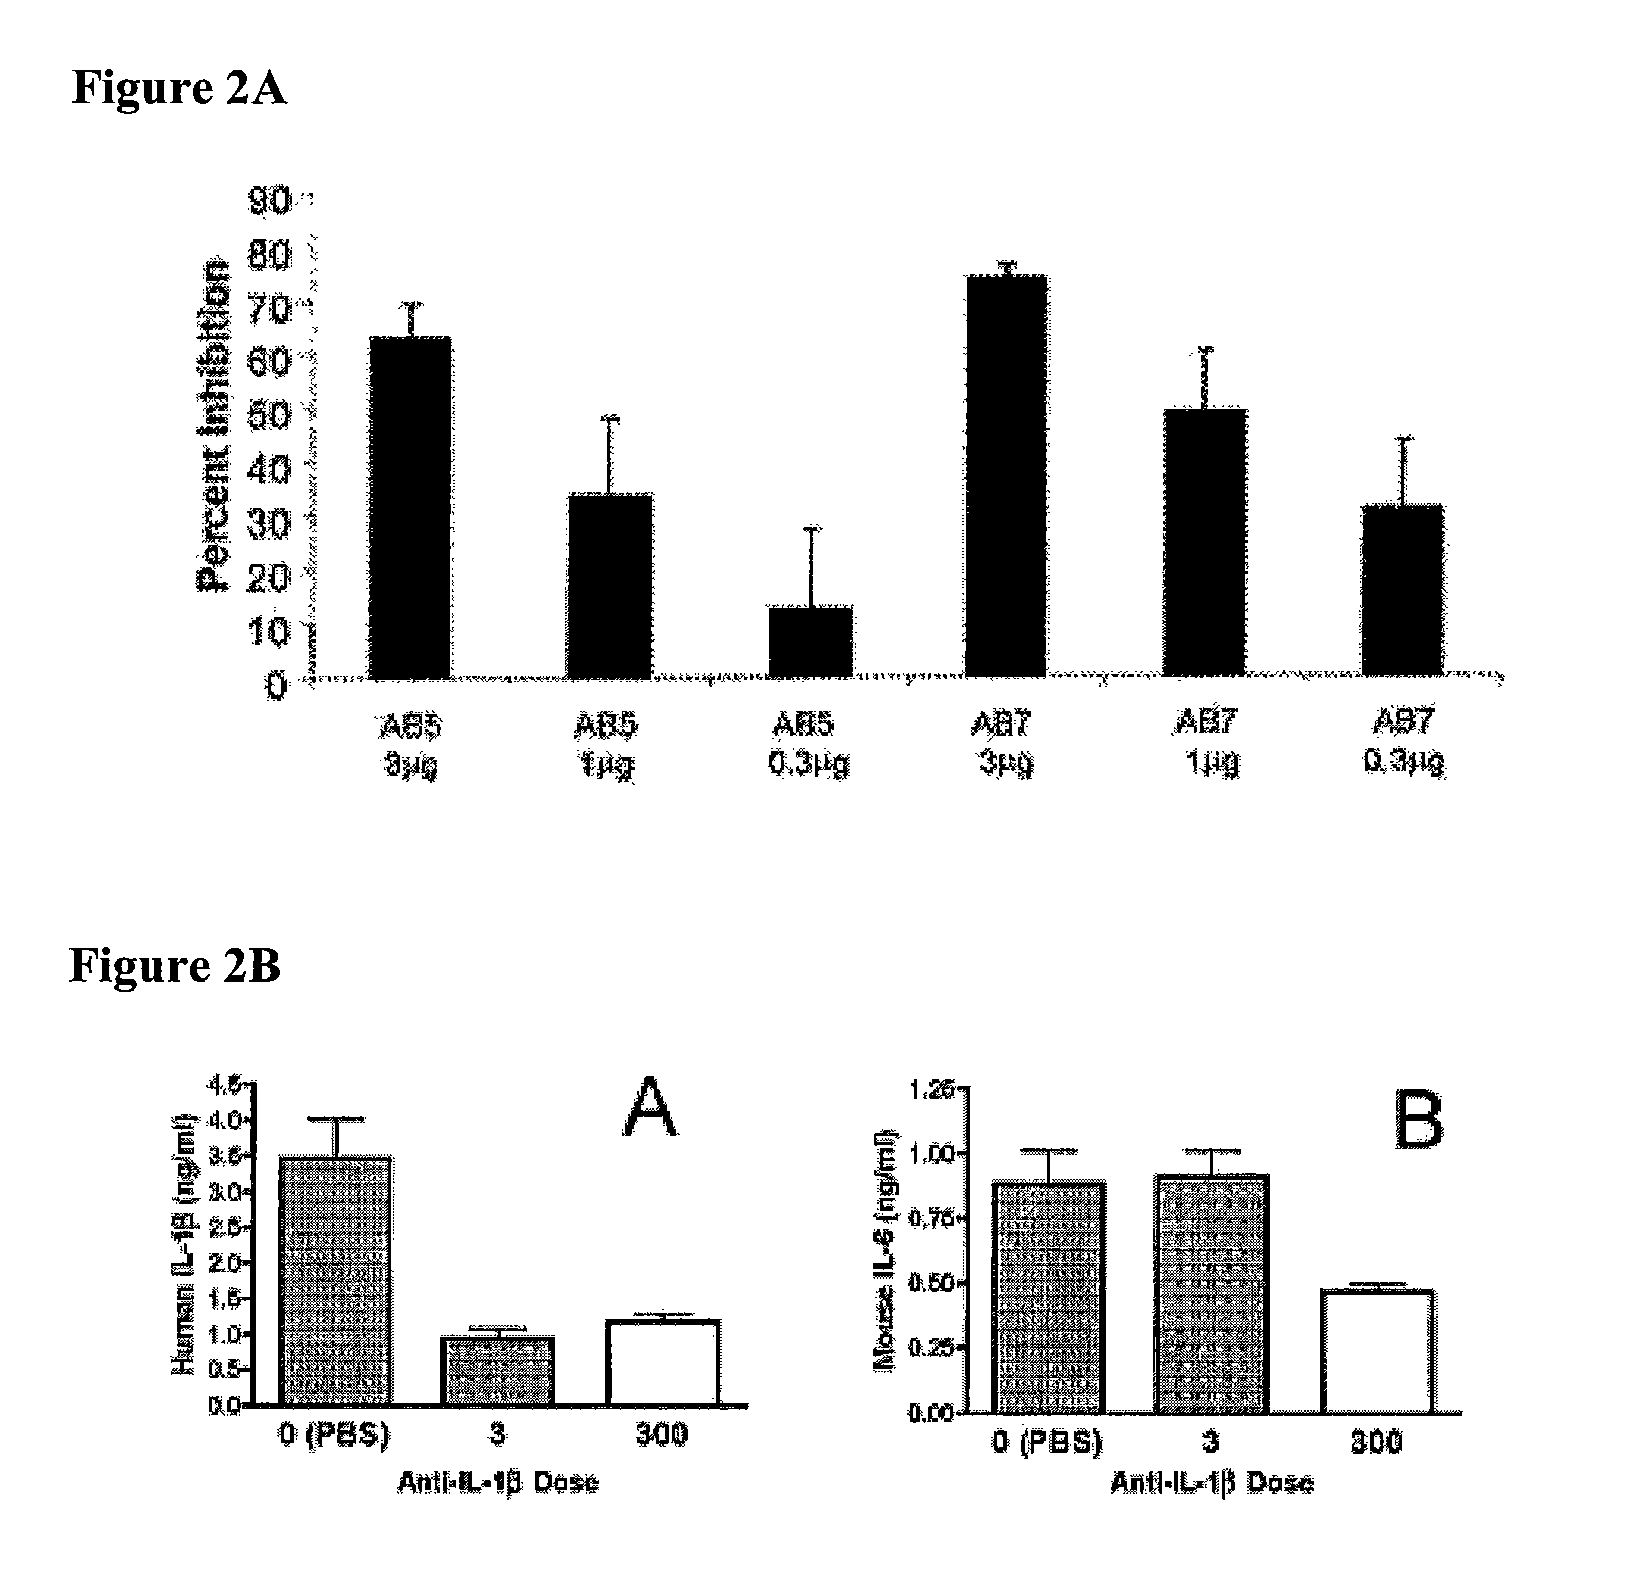 Methods for the treatment of IL-1β related diseases